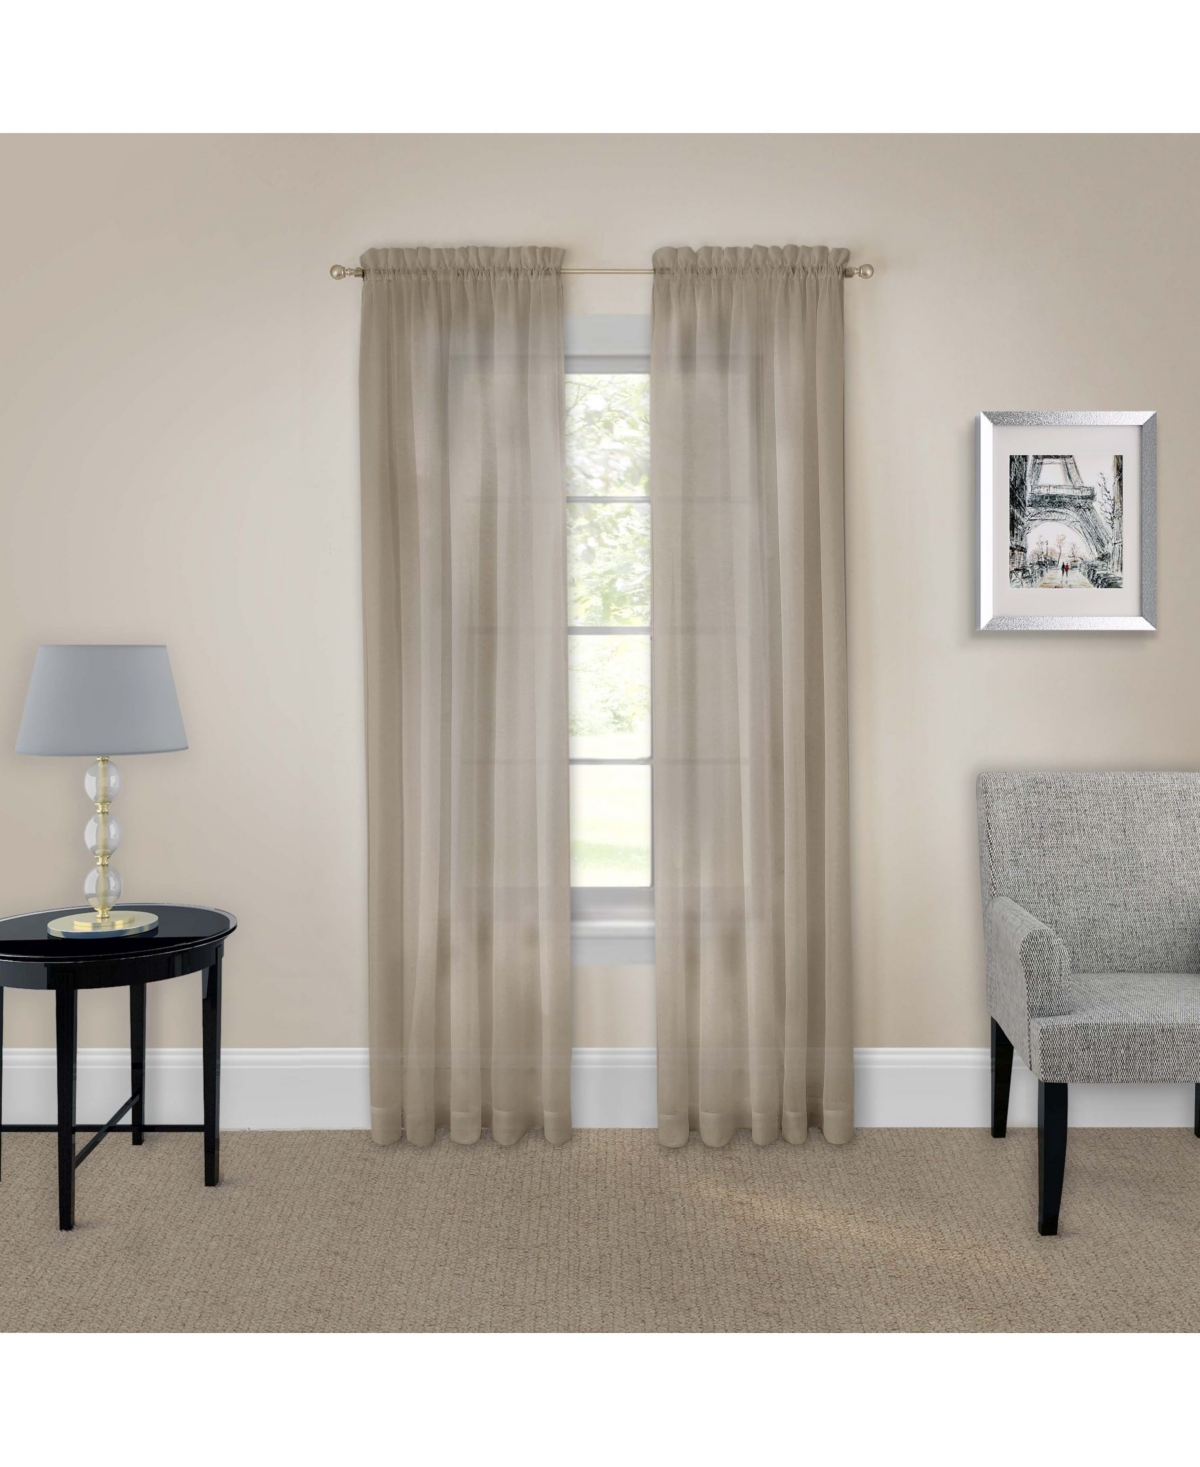 Eclipse Pairs To Go Victoria Voile 95" X 118" Curtain Panel, Set Of 2 In Taupe